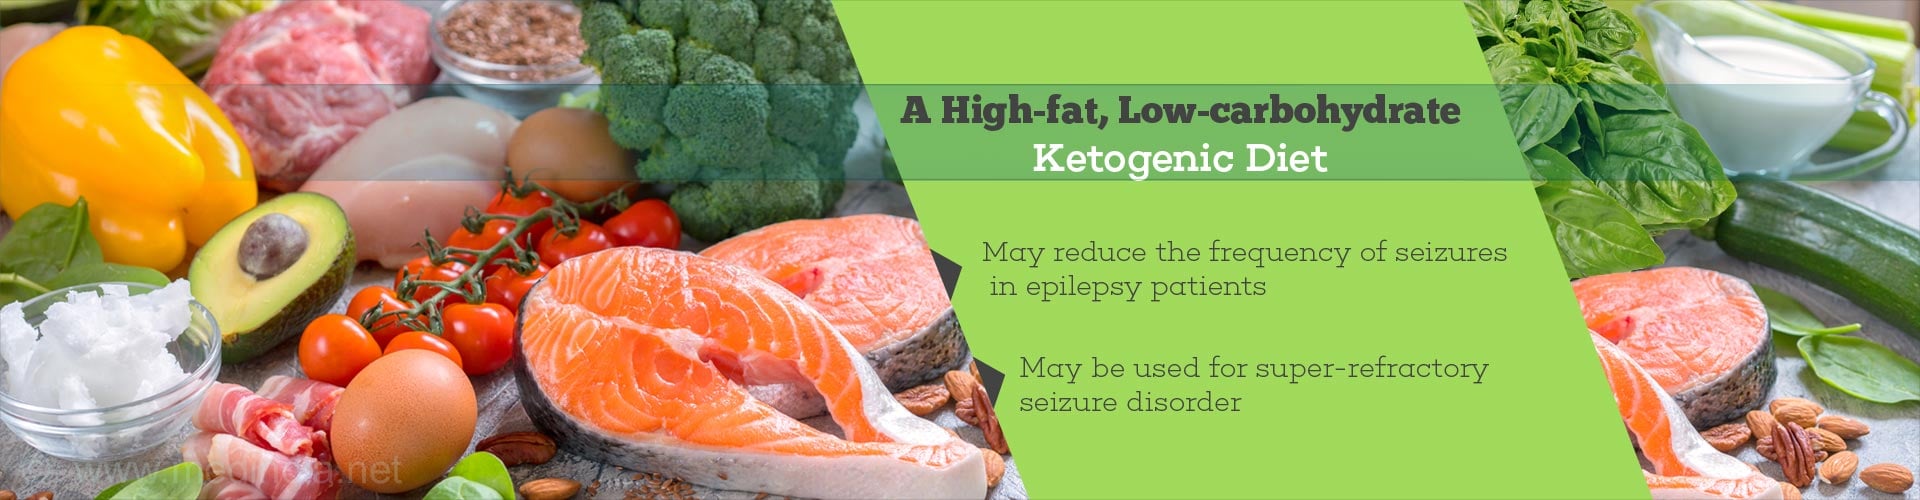 A high-fat, low carbohydrate ketogenic diet
- may reduce the frequency of seizures in epilepsy patients
- may be used for super-refractory seizure disorder